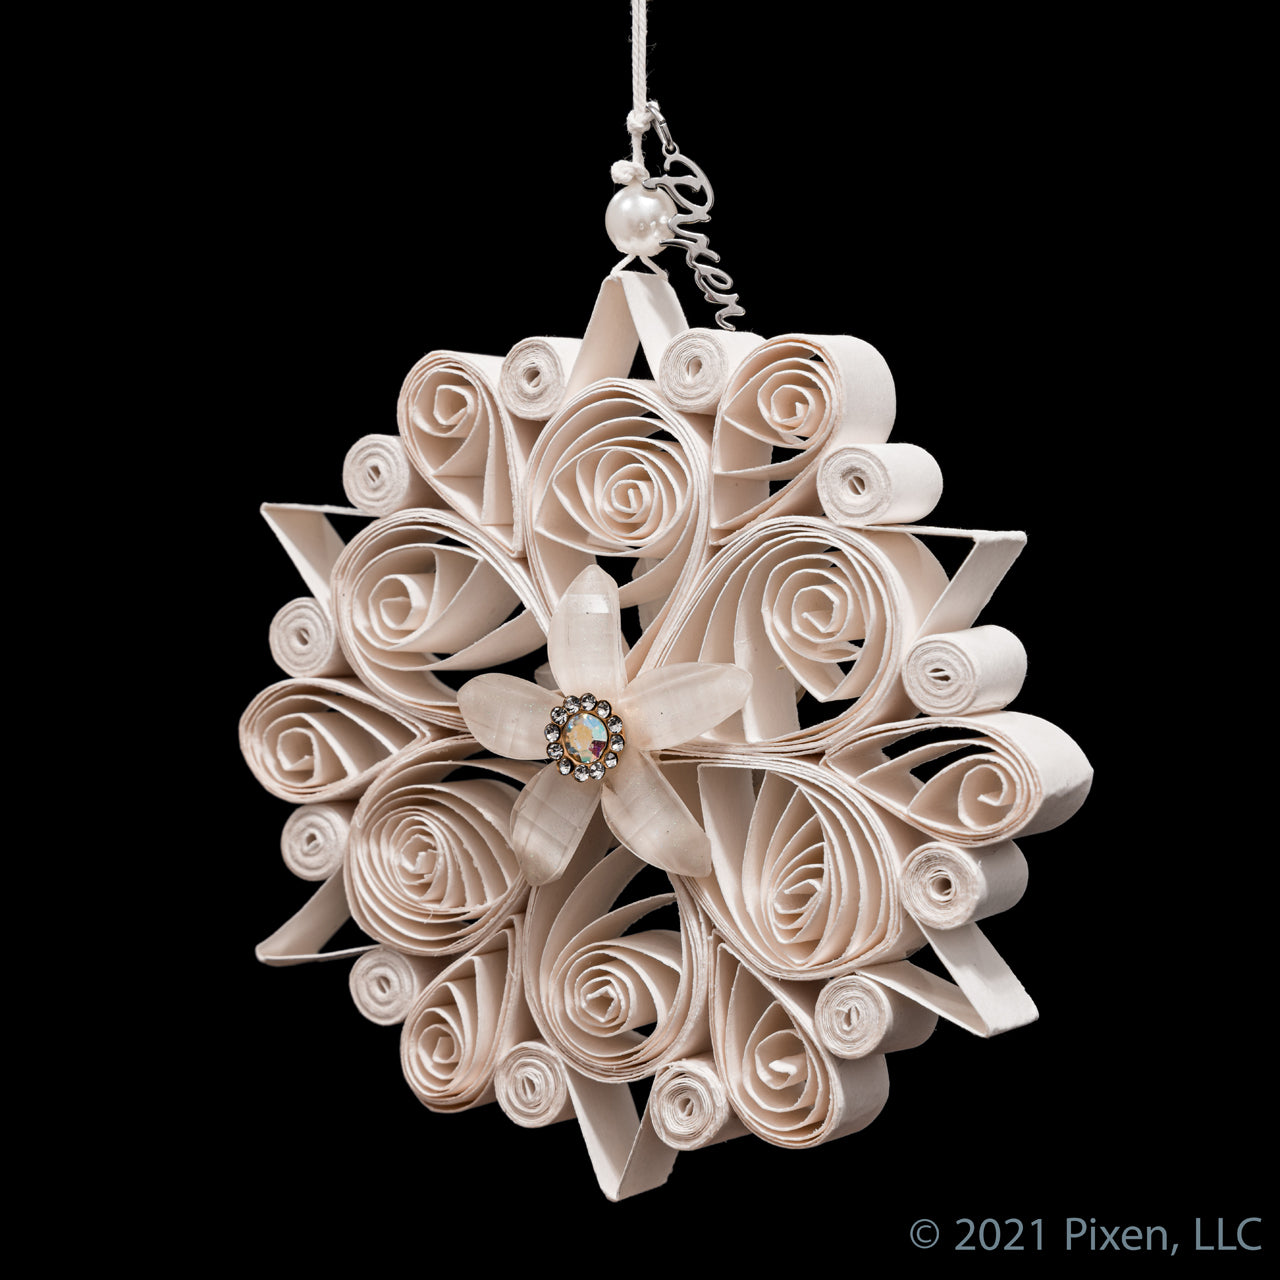 Bernadine 2 hand crafted paper Christmas Ornament by House of Pixen